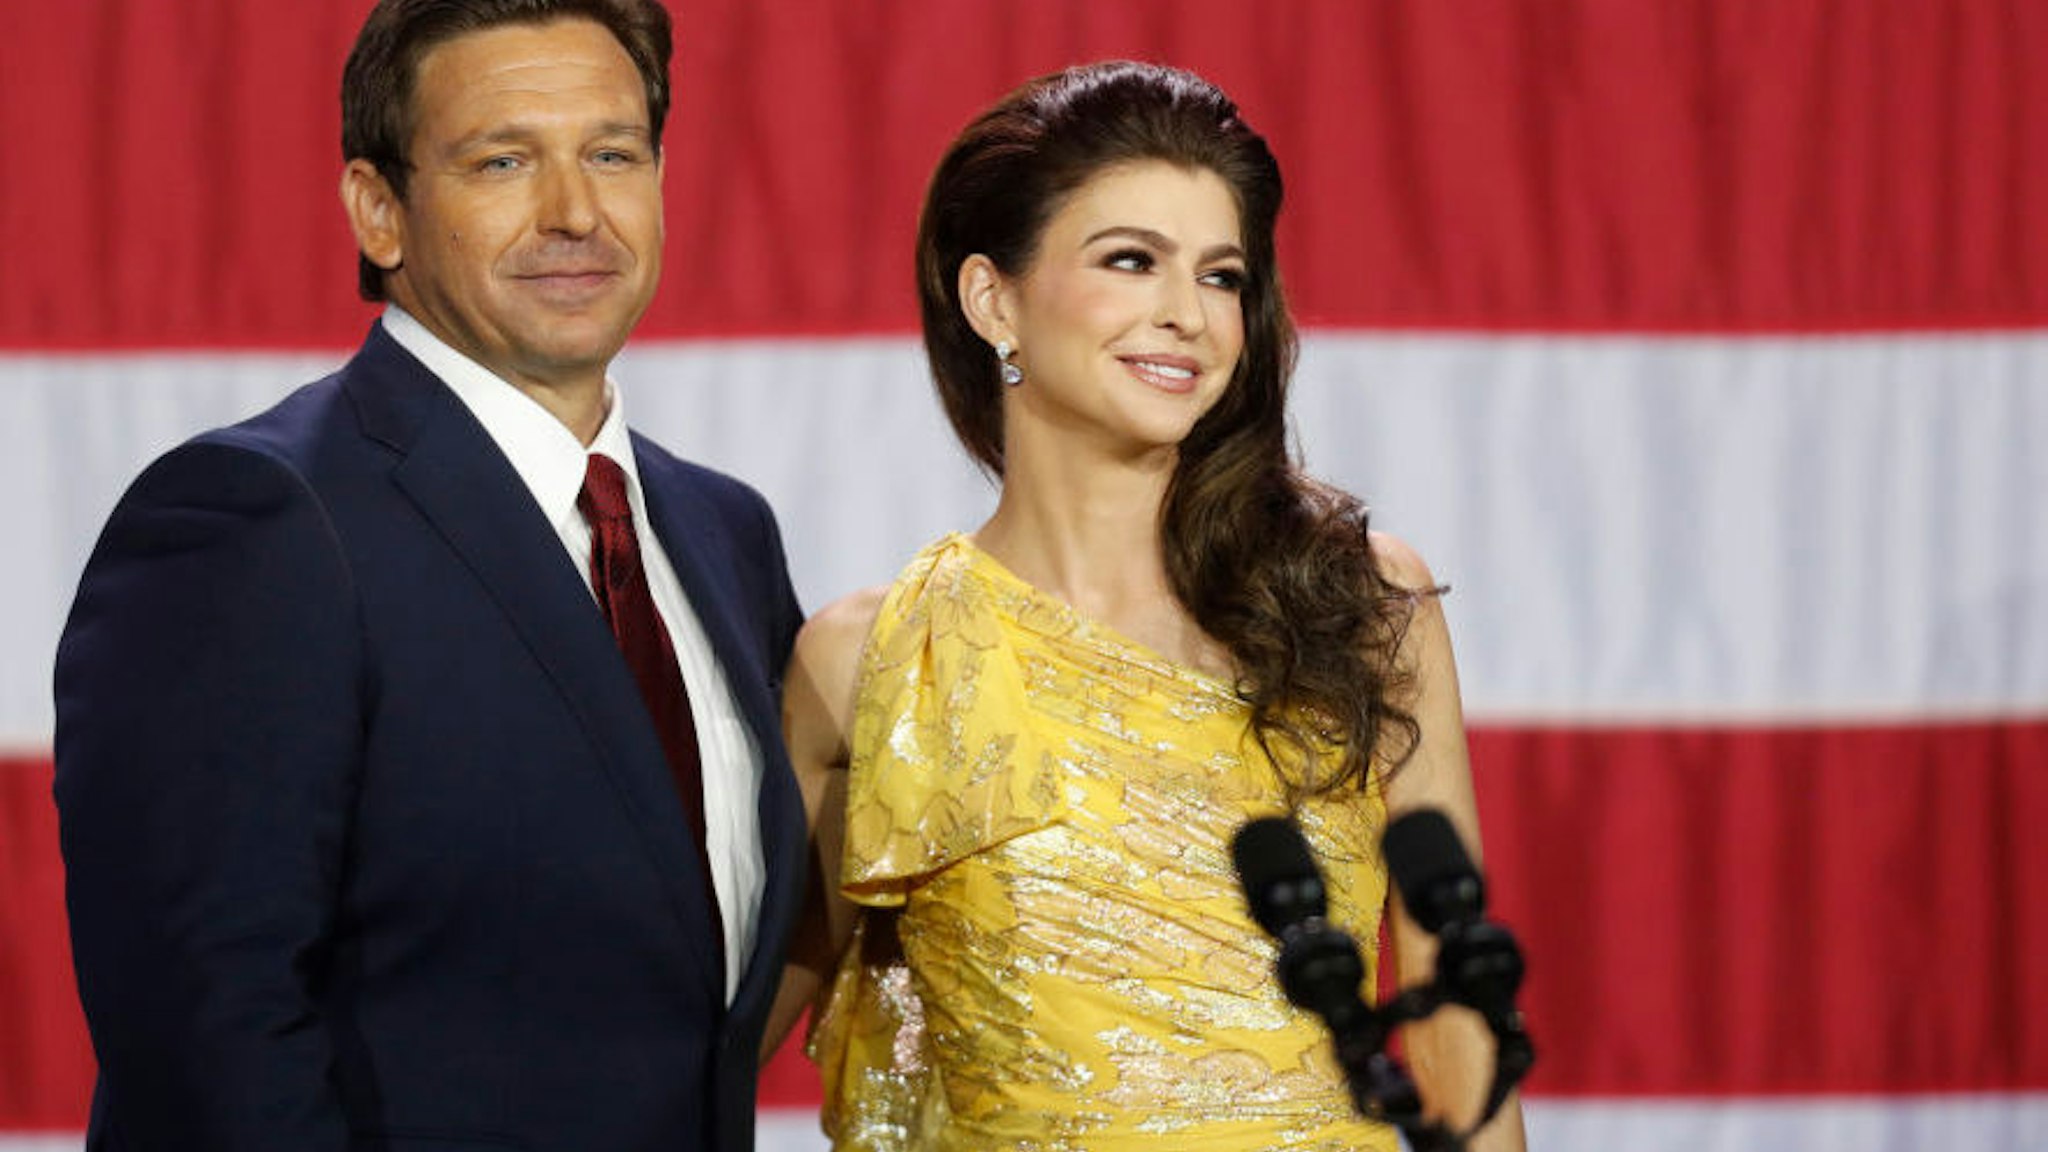 Florida Gov. Ron DeSantis and his wife Casey DeSantis celebrate his victory over Democratic gubernatorial candidate Rep. Charlie Crist during an election night watch party at the Tampa Convention Center on November 8, 2022 in Tampa, Florida.